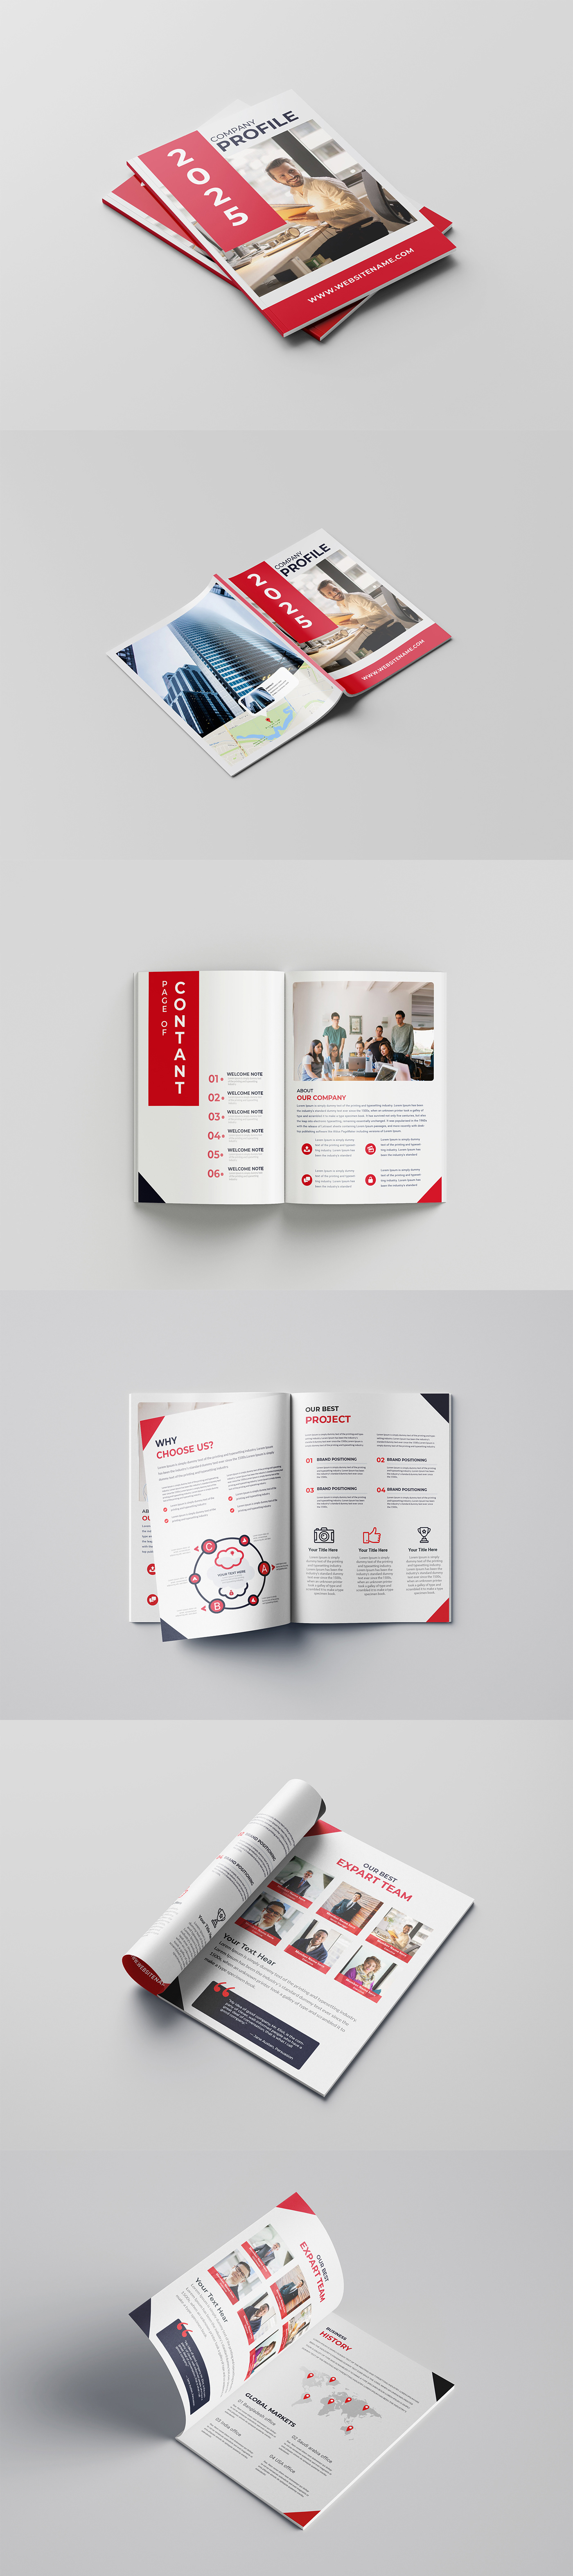 brochure magazine corporate profile ANNUAL information report modern pages leaflet